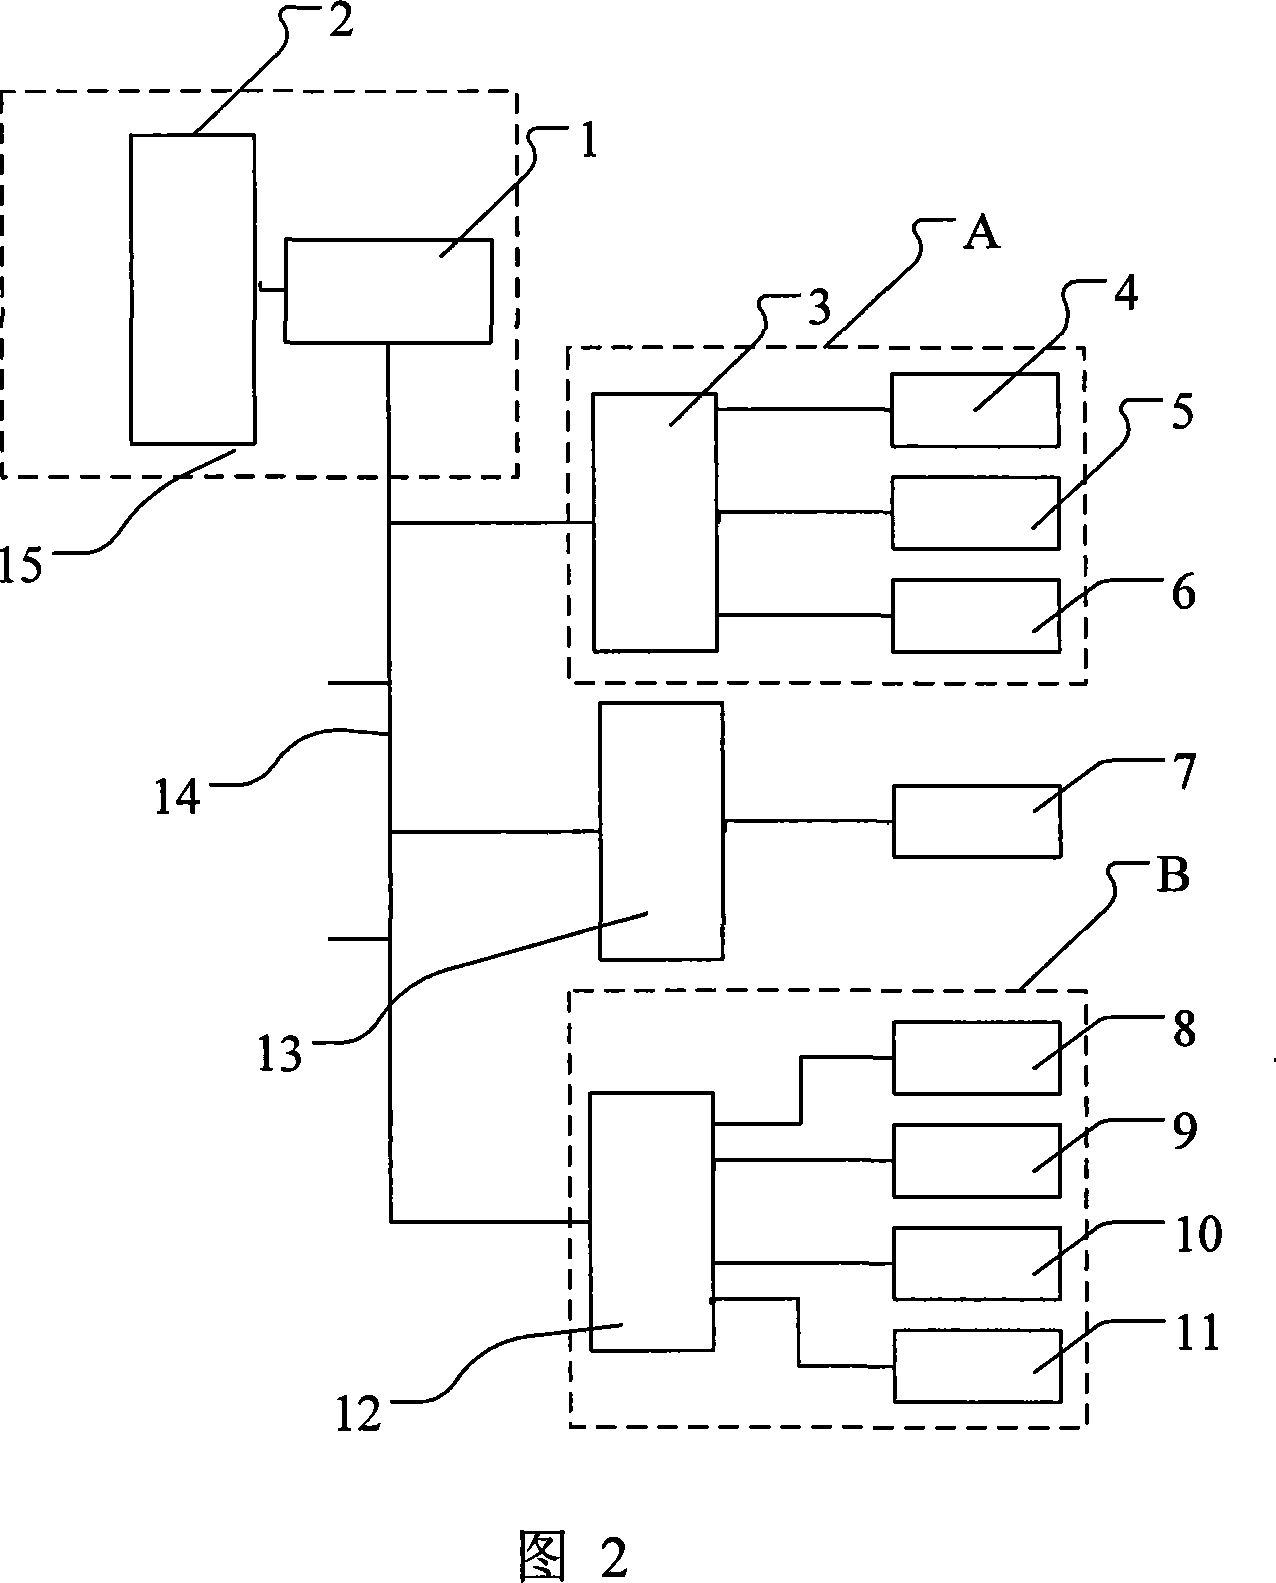 Serial multi-axis stepper control method and system for tin paste printing machine